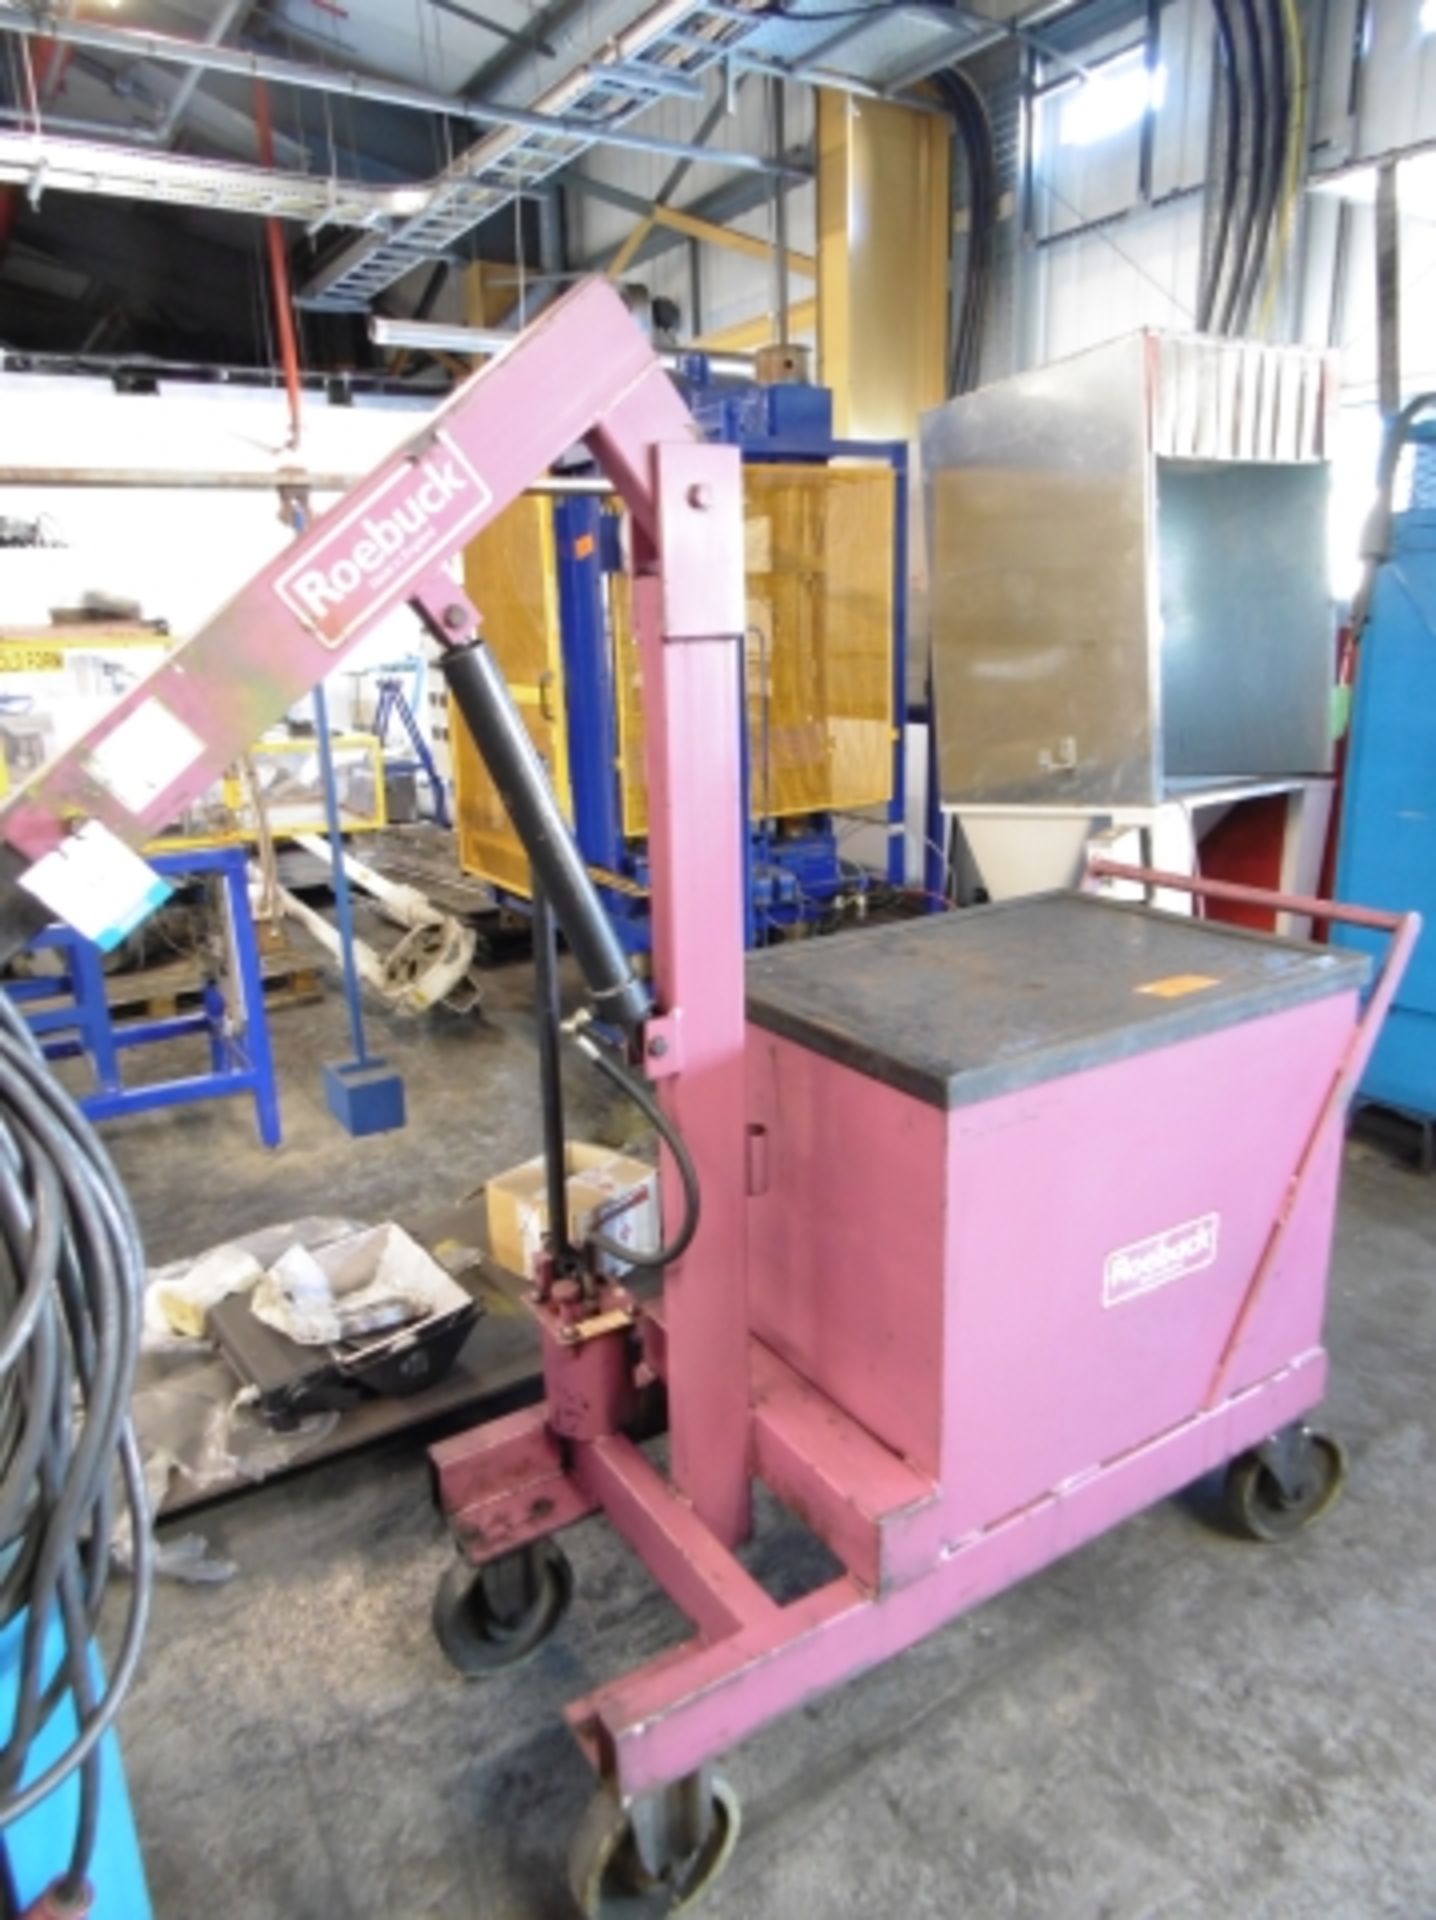 * Roebuck 250kg Mobile Hydraulic Hoist.  Please note there is a £10 plus VAT handling fee with